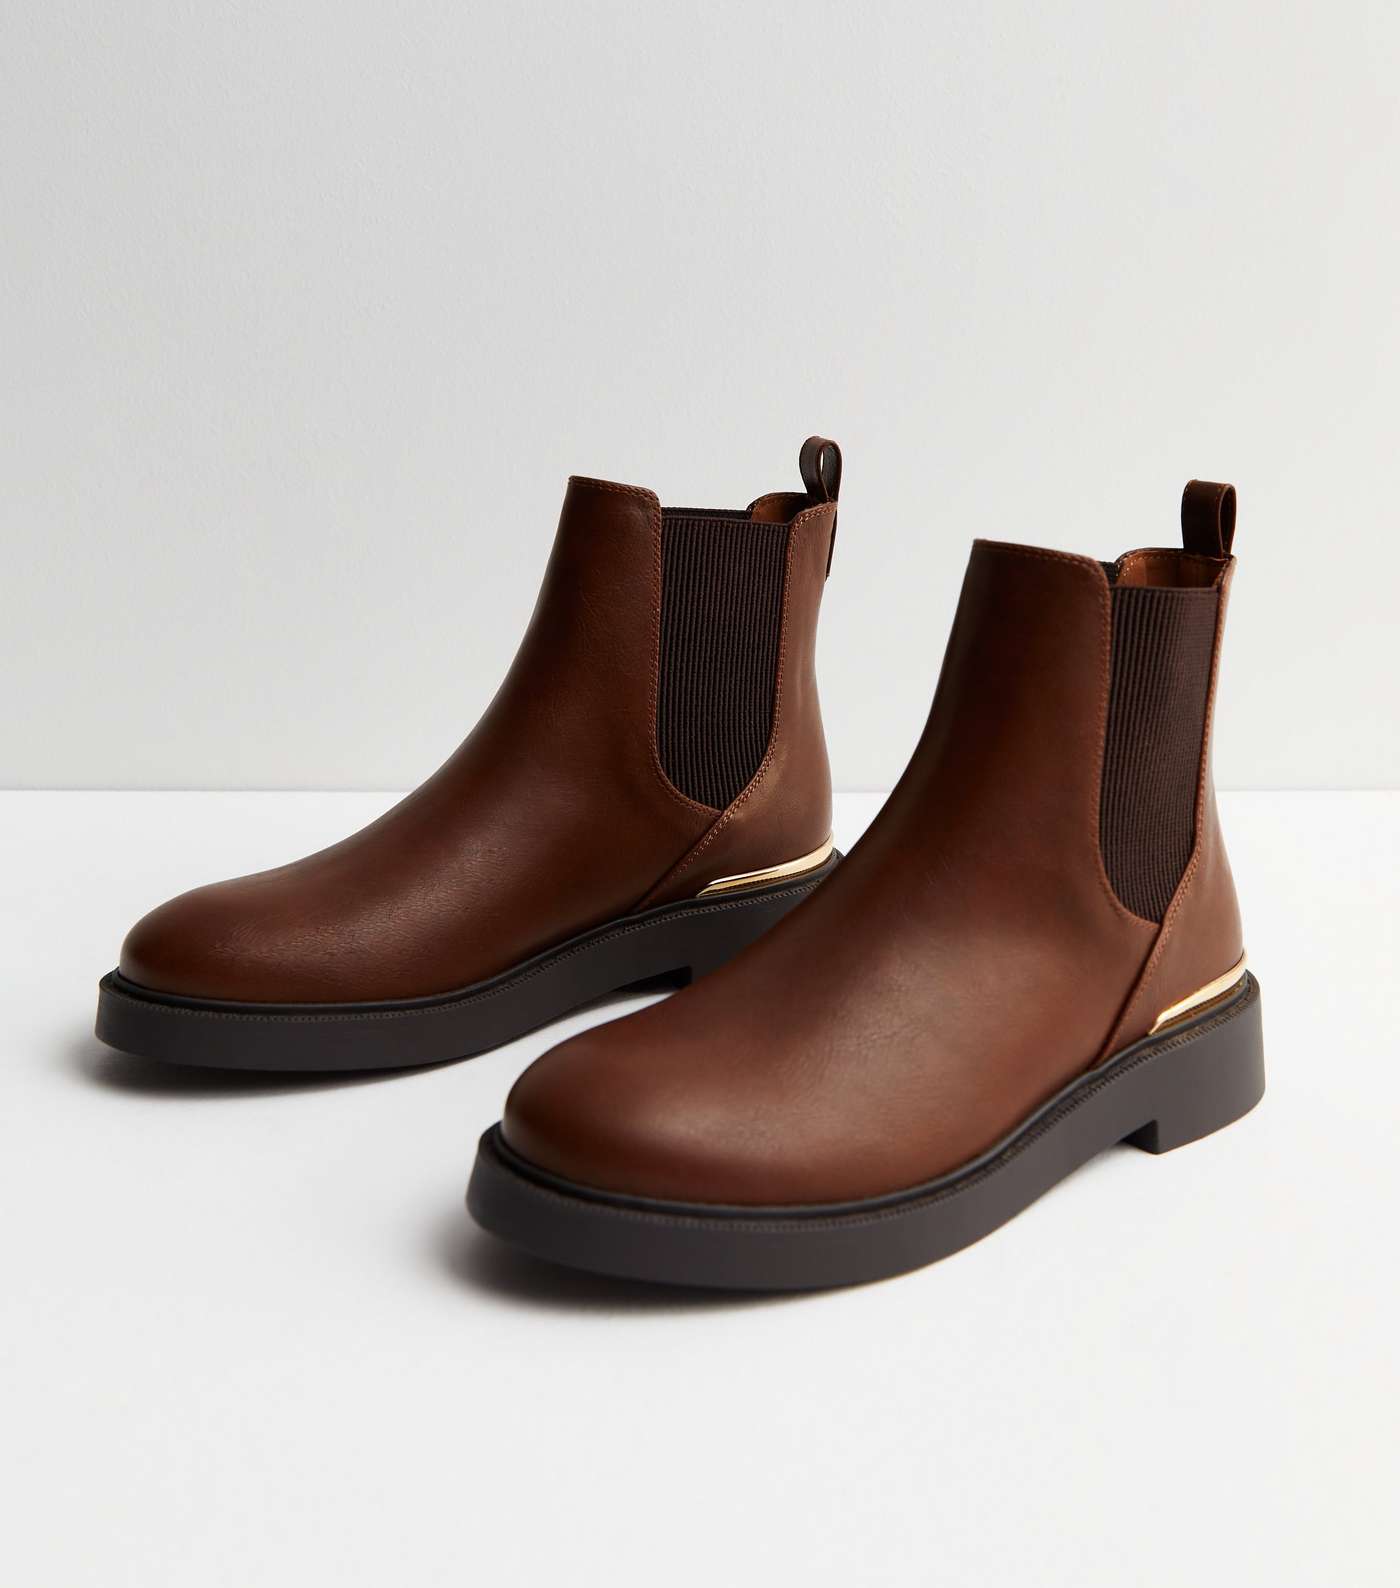 Tan Leather-Look Metal Trim Chelsea Boots Image 2